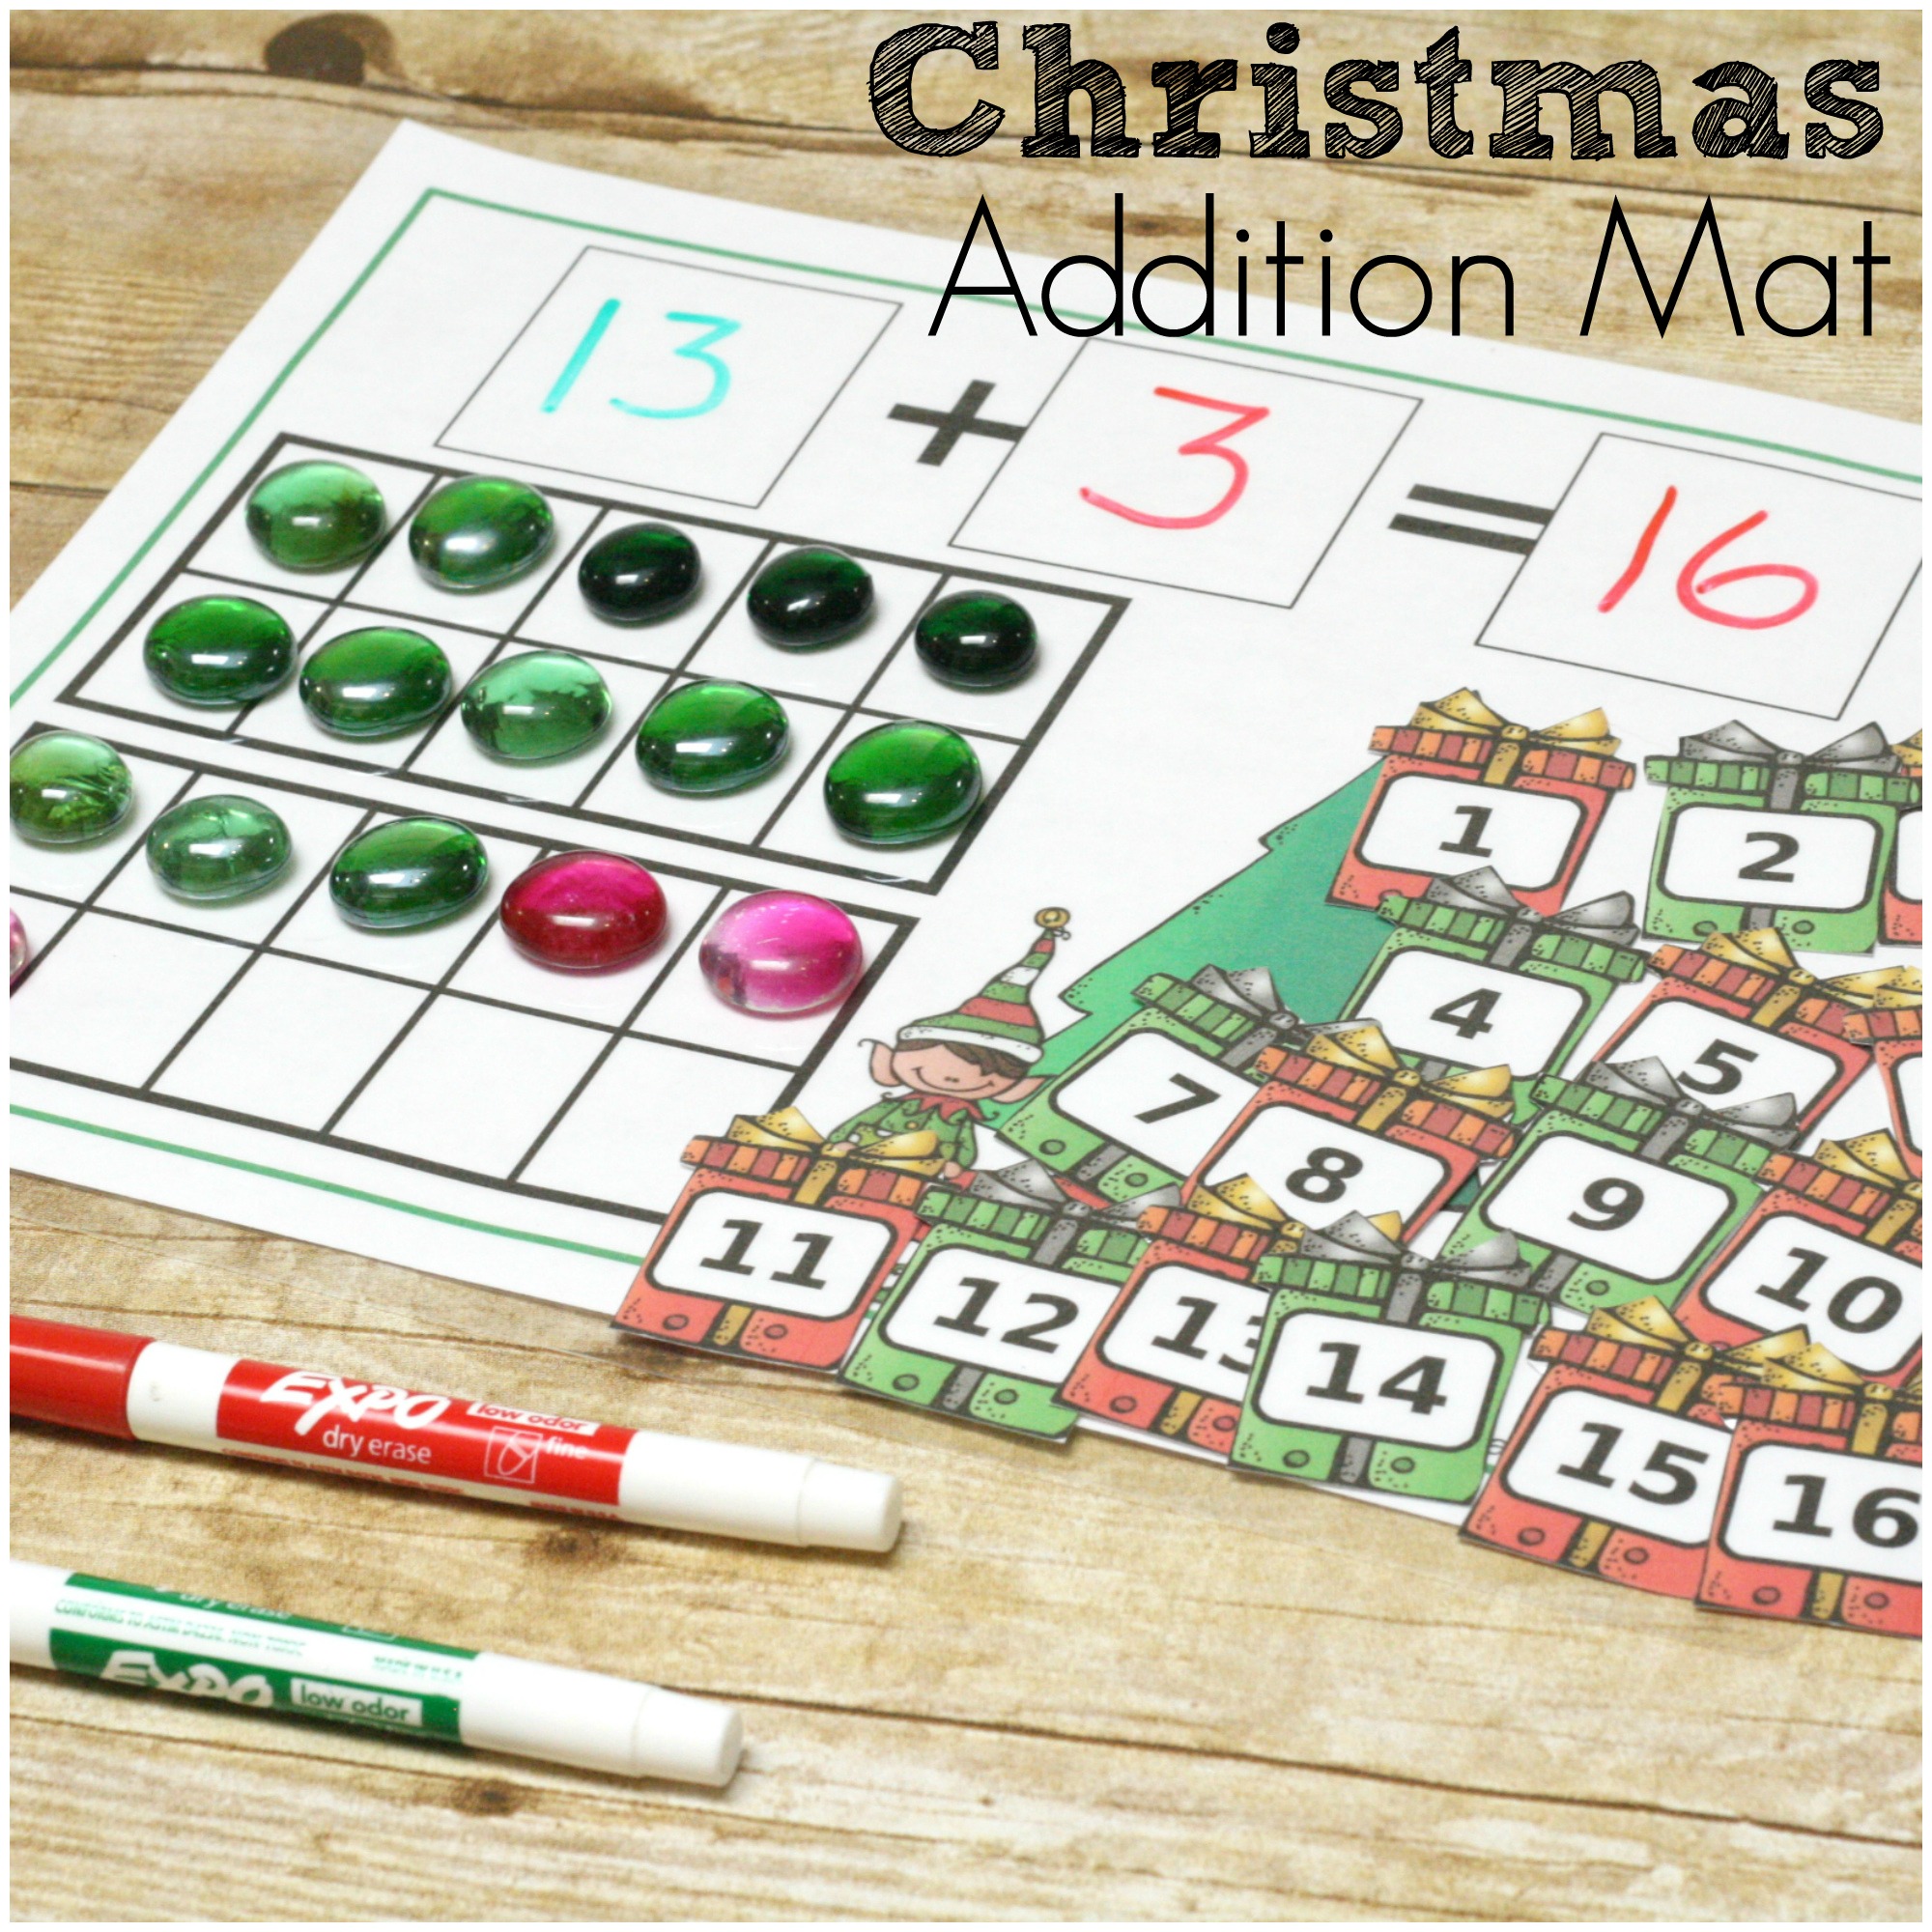 20 Laminated  Dry Erase Mats Bear Counter Subtraction Cross out 